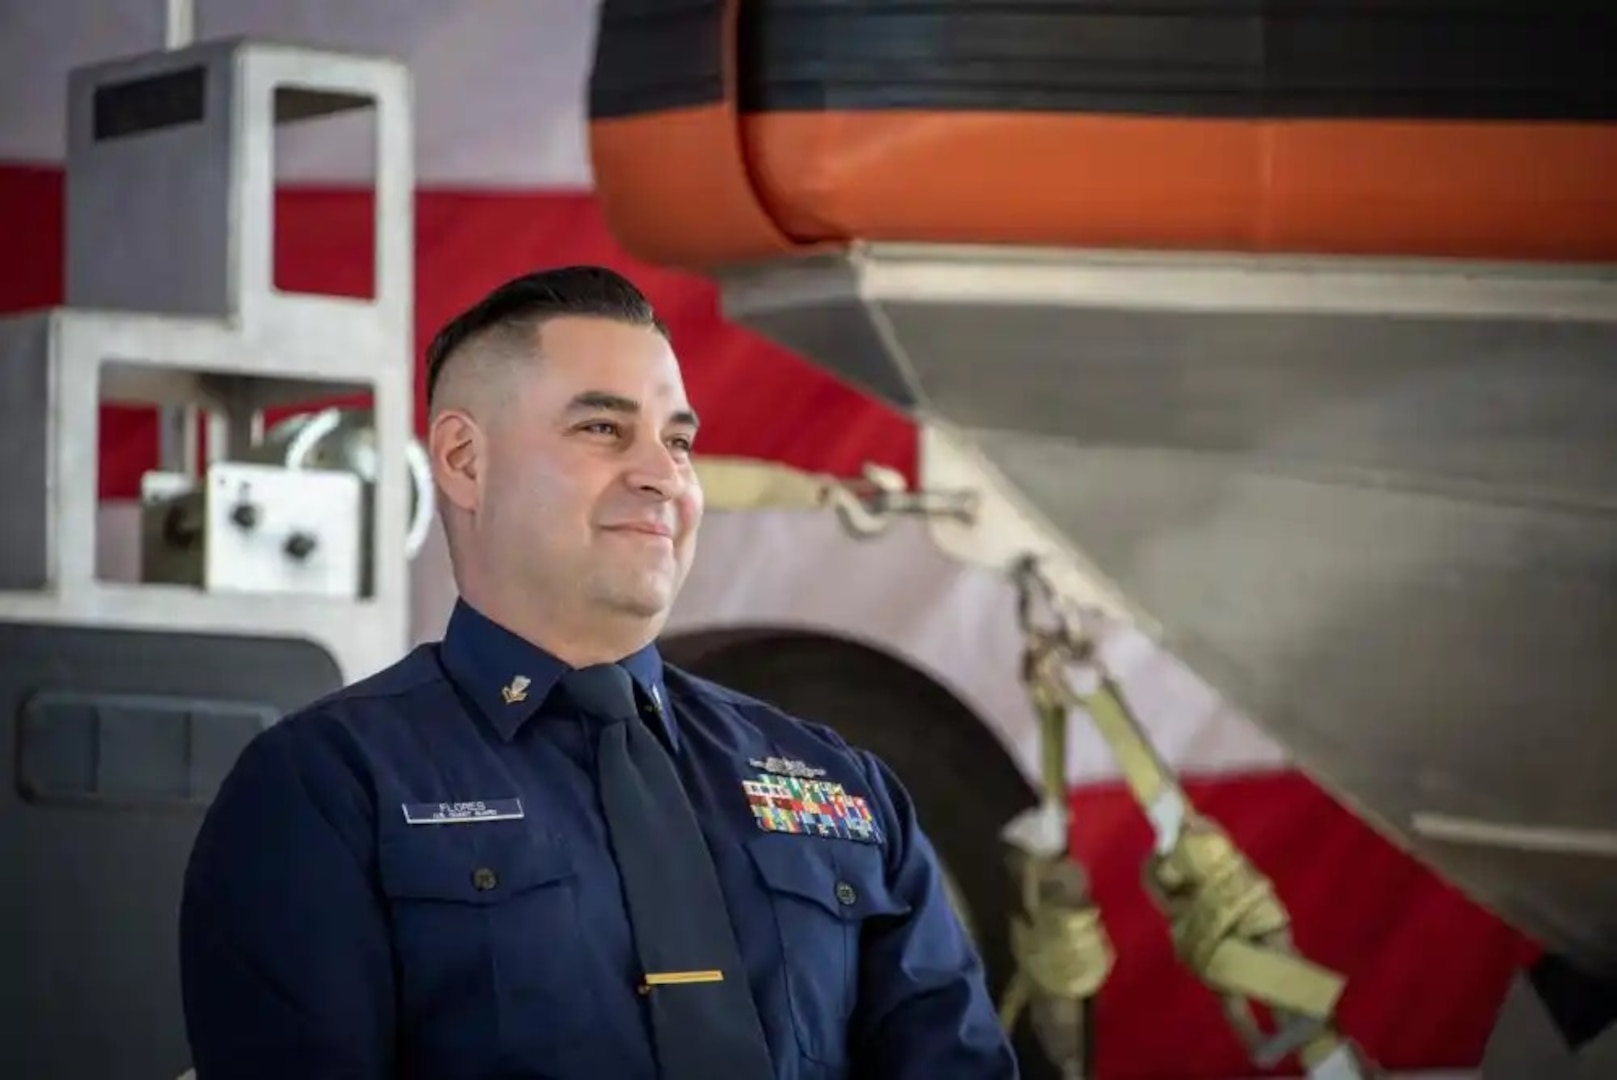 Coast Guard Petty Officer 2nd Class Jake Flores, maritime enforcement specialist at Maritime Safety & Security Team Houston and 2022 USO Service Member of the Year honoree, beams during a ceremony in Houston, Texas, Dec. 1, 2022. Flores’s command nominated him for the award for jumping into the Rio Grande to save a drowning baby during a patrol on June 2, 2022. (U.S. Coast Guard photo by Petty Officer 1st Class Corinne Zilnicki)